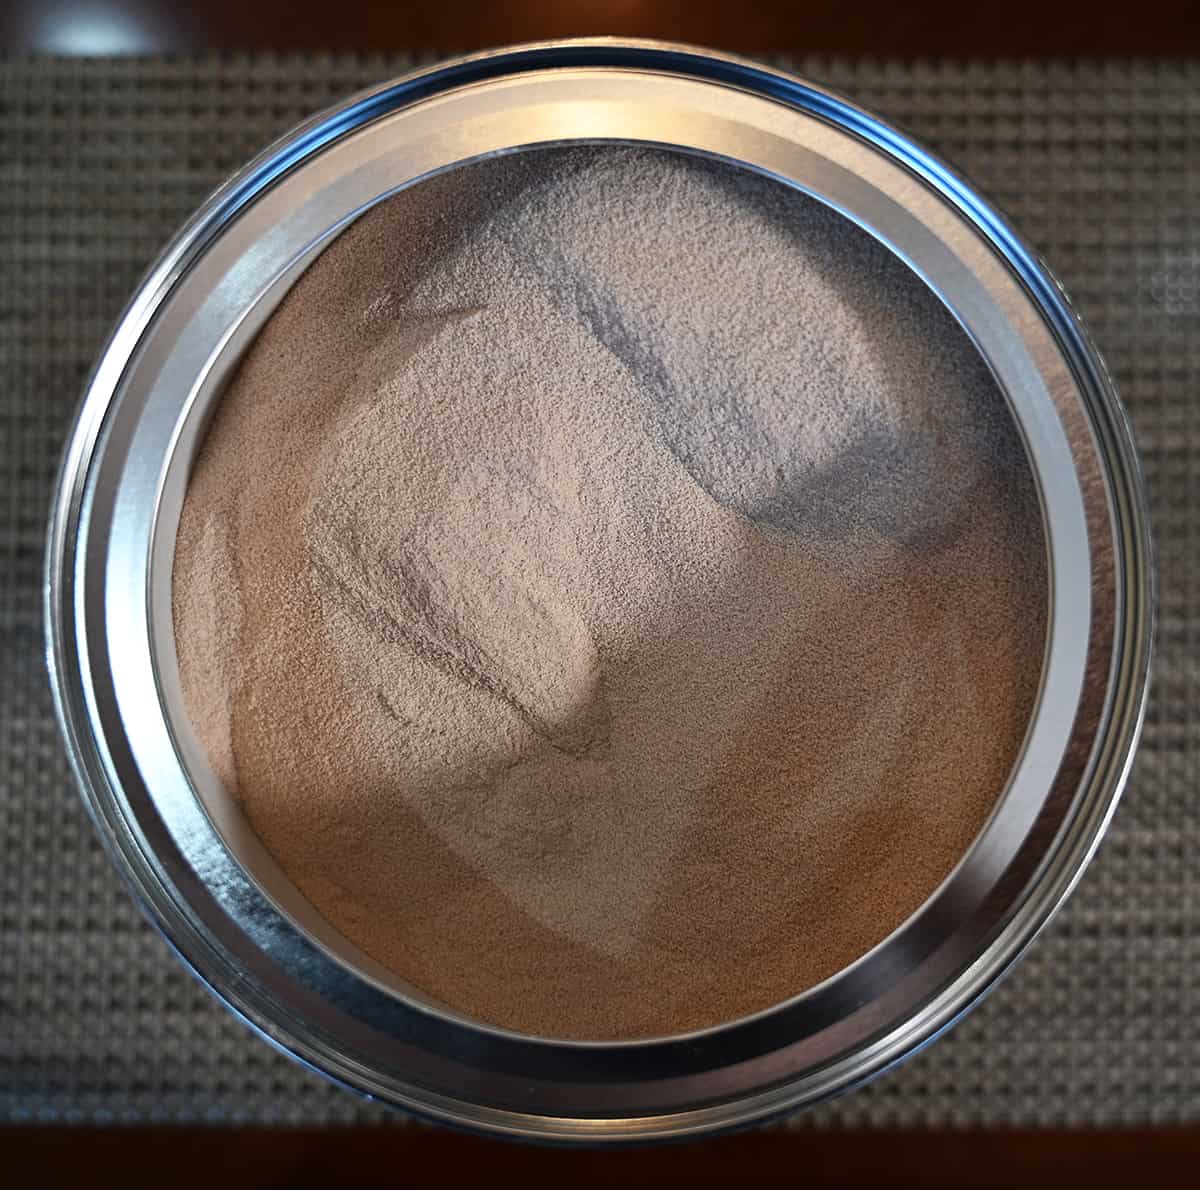 Top down image of an open container of the iced tea mix showing what the powder mix looks like.